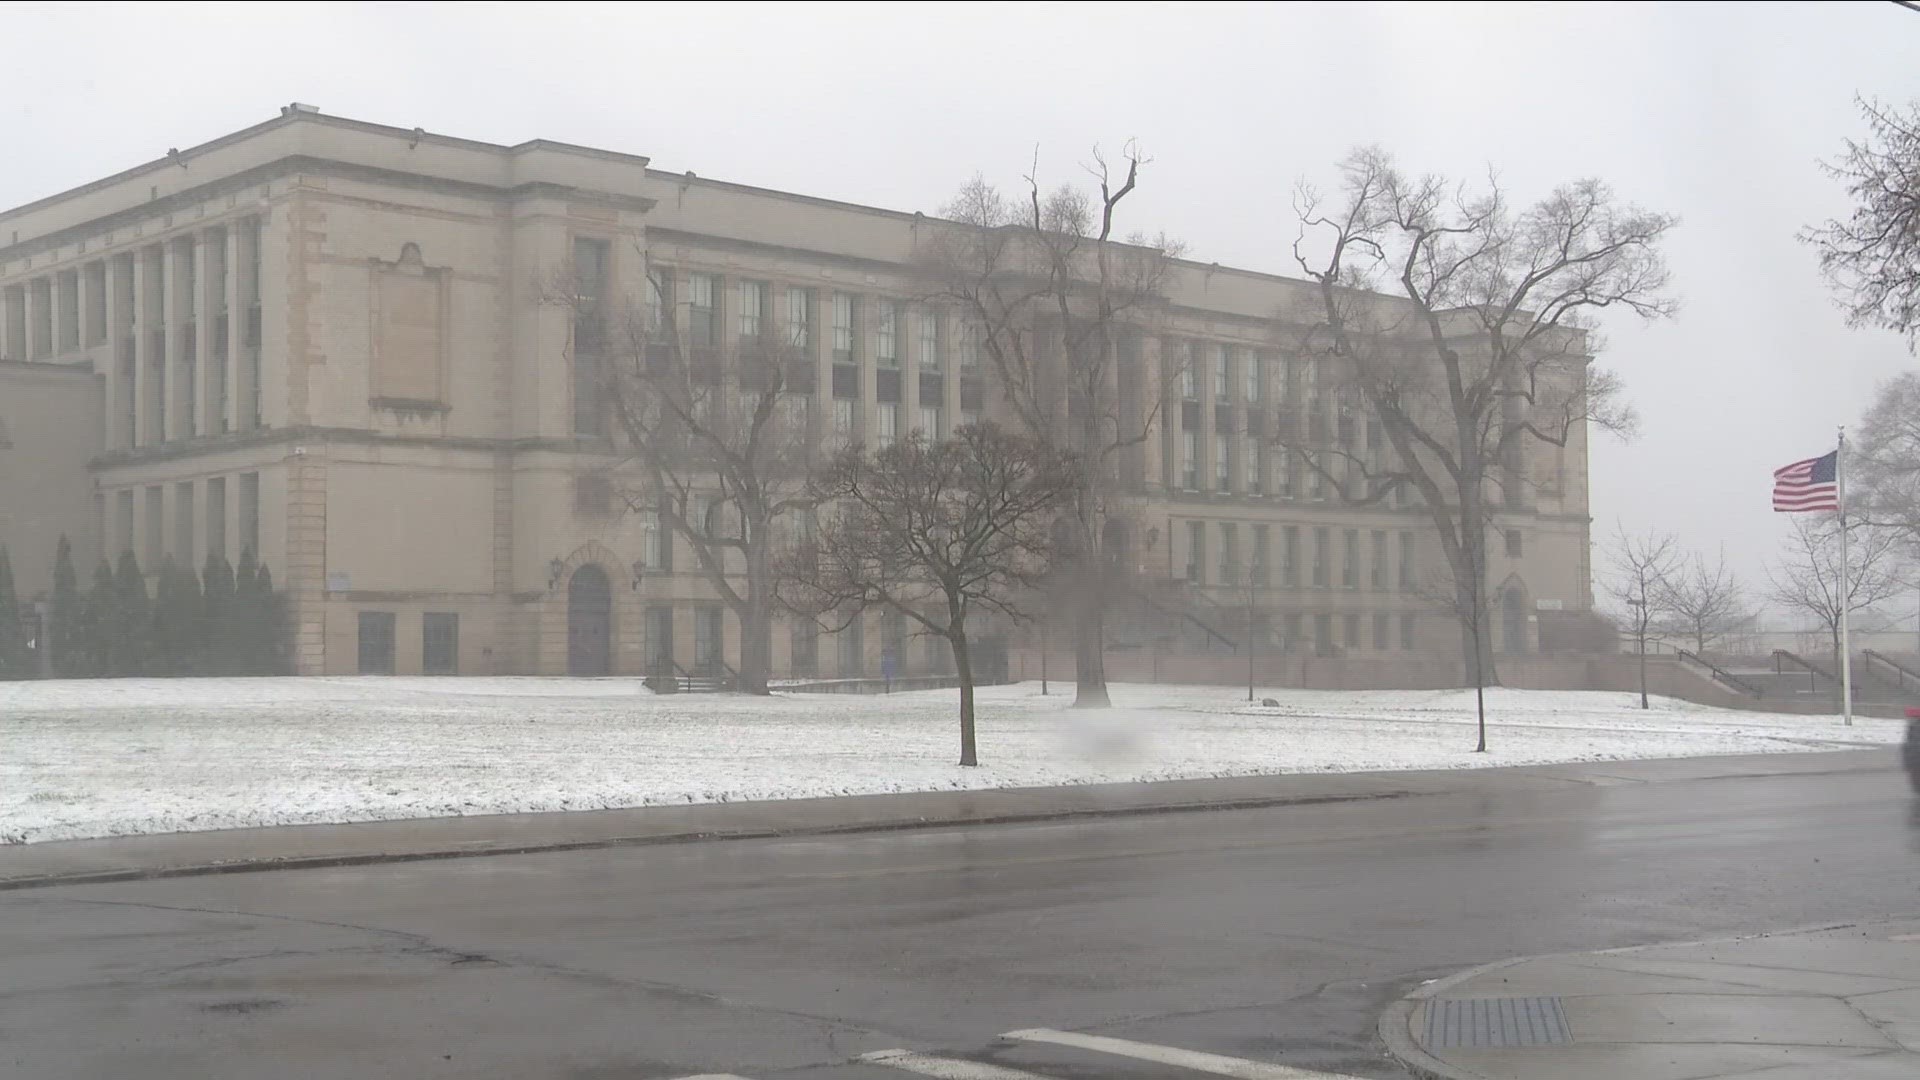 There are new concerns about safety inside Buffalo Public Schools after a video shows students fighting while others watched.